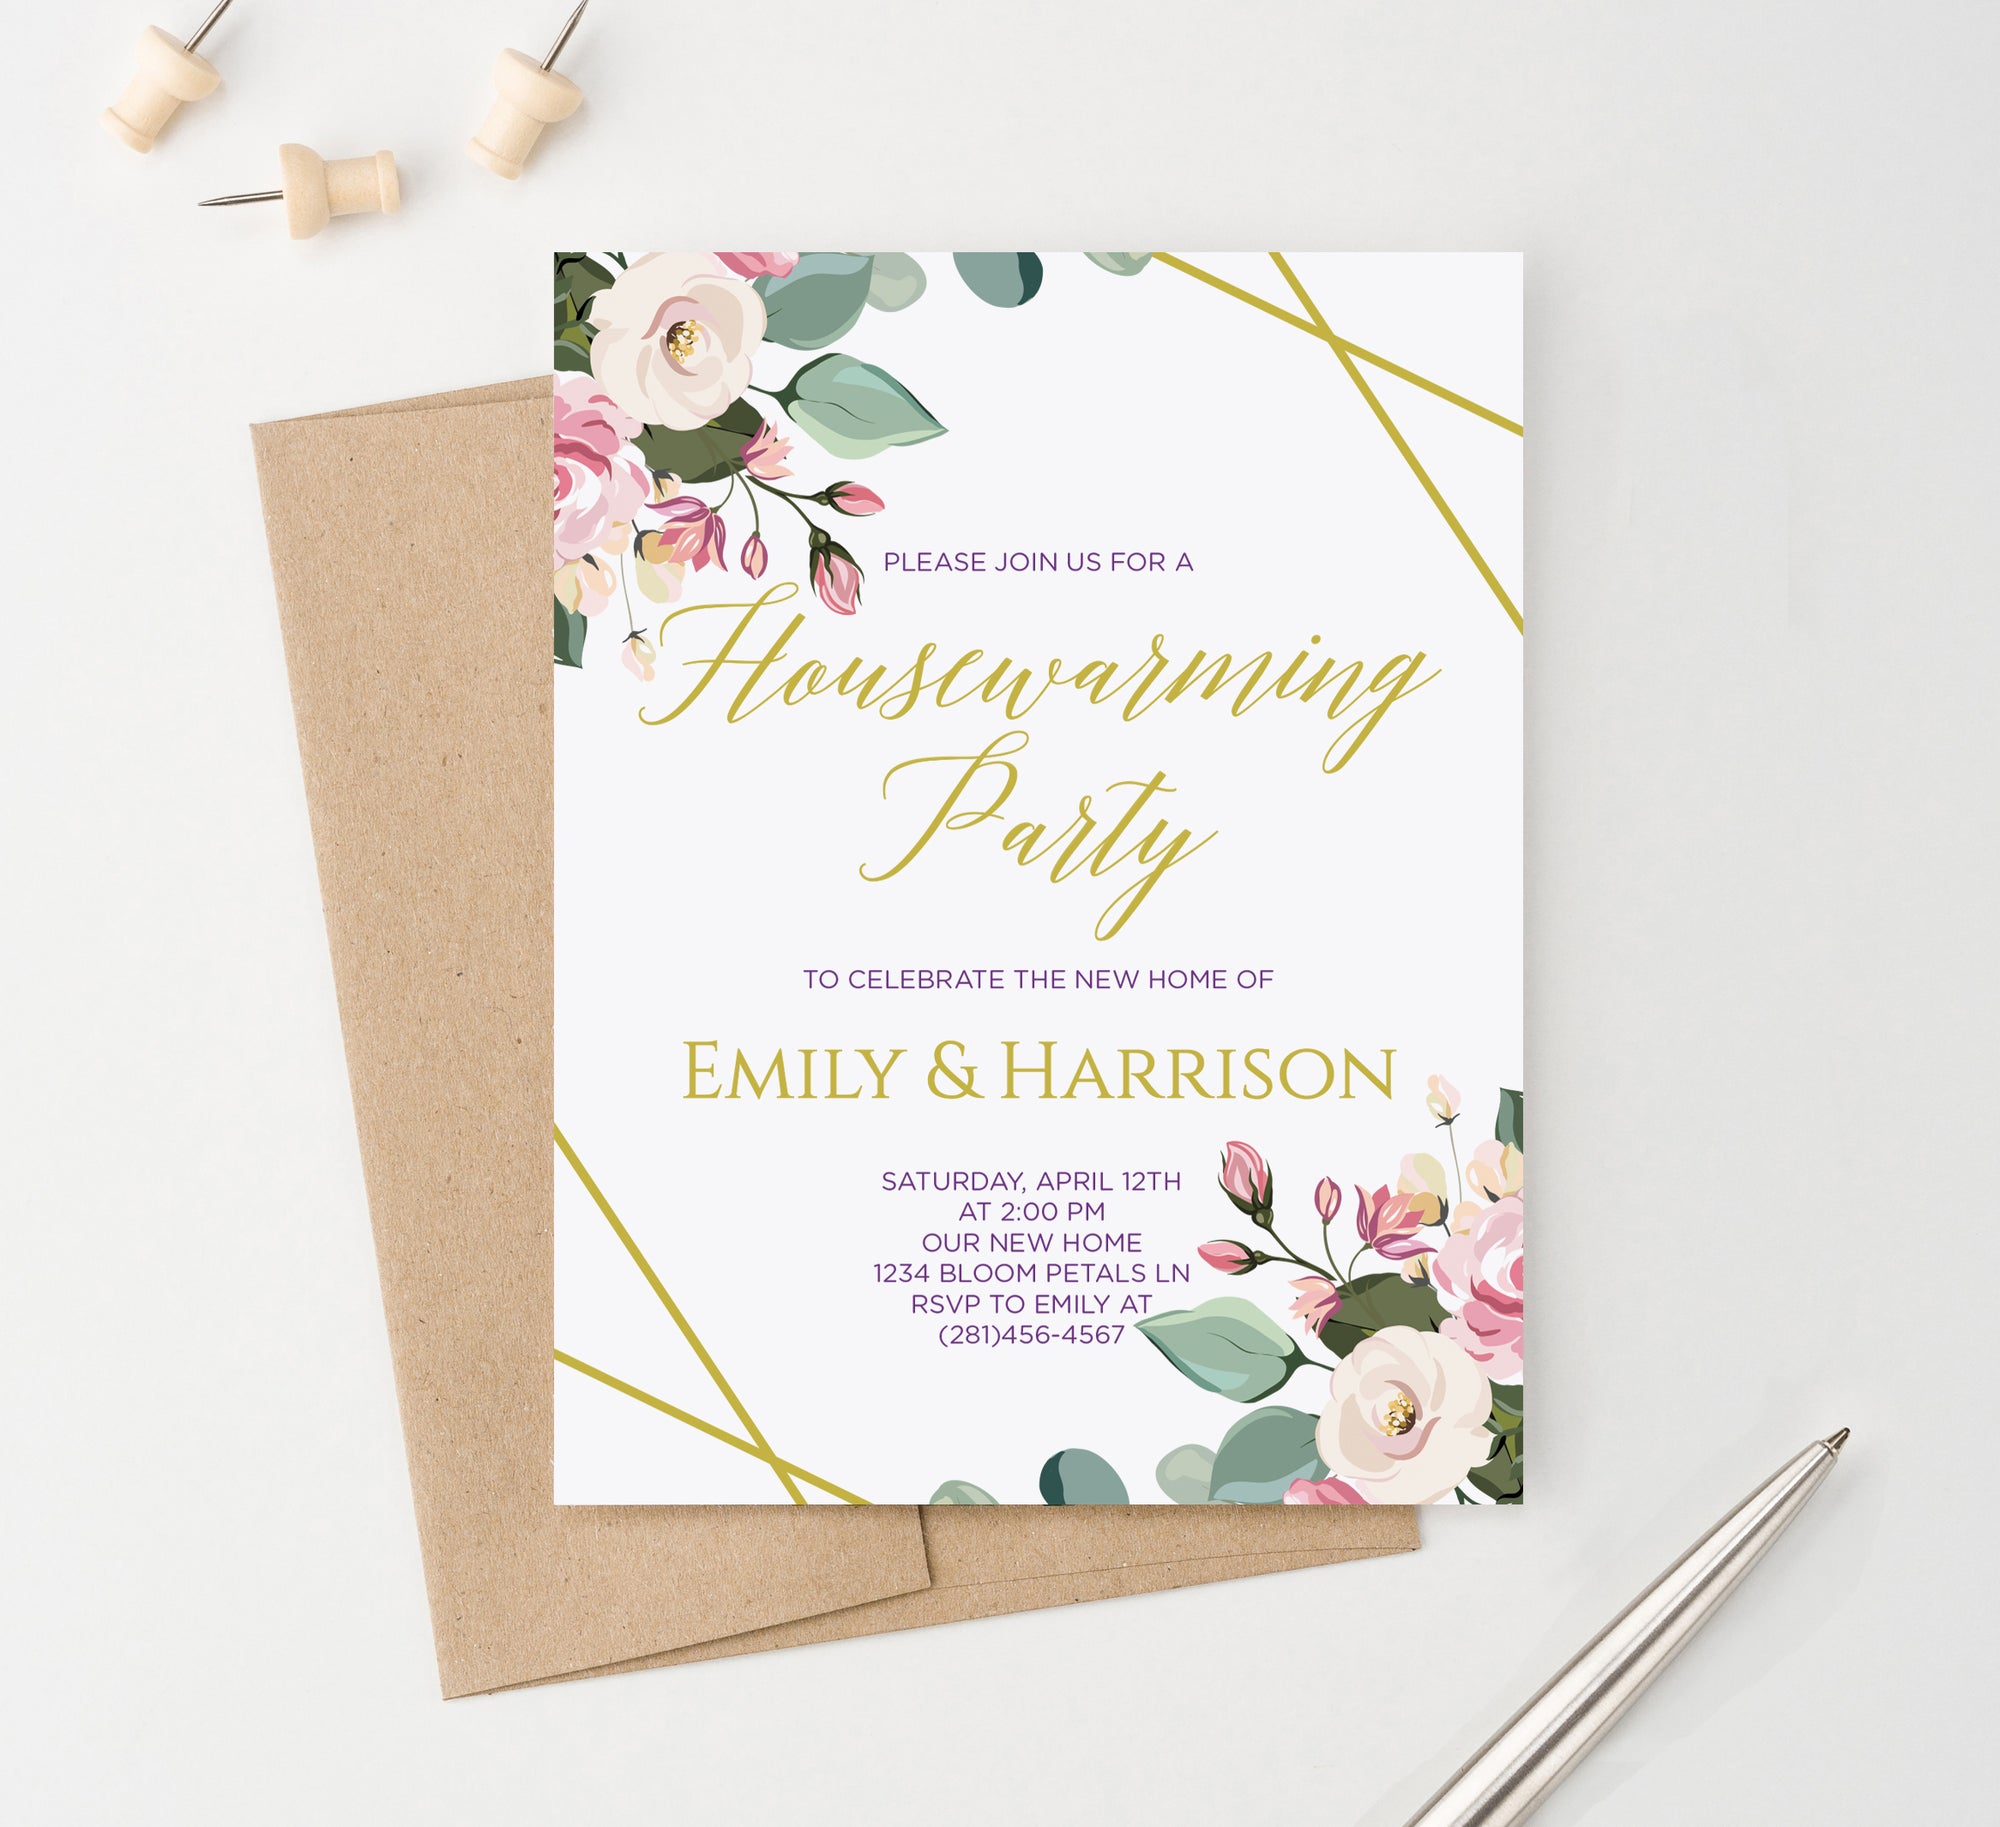 Personalized Housewarming Party Invitations With Floral Corners